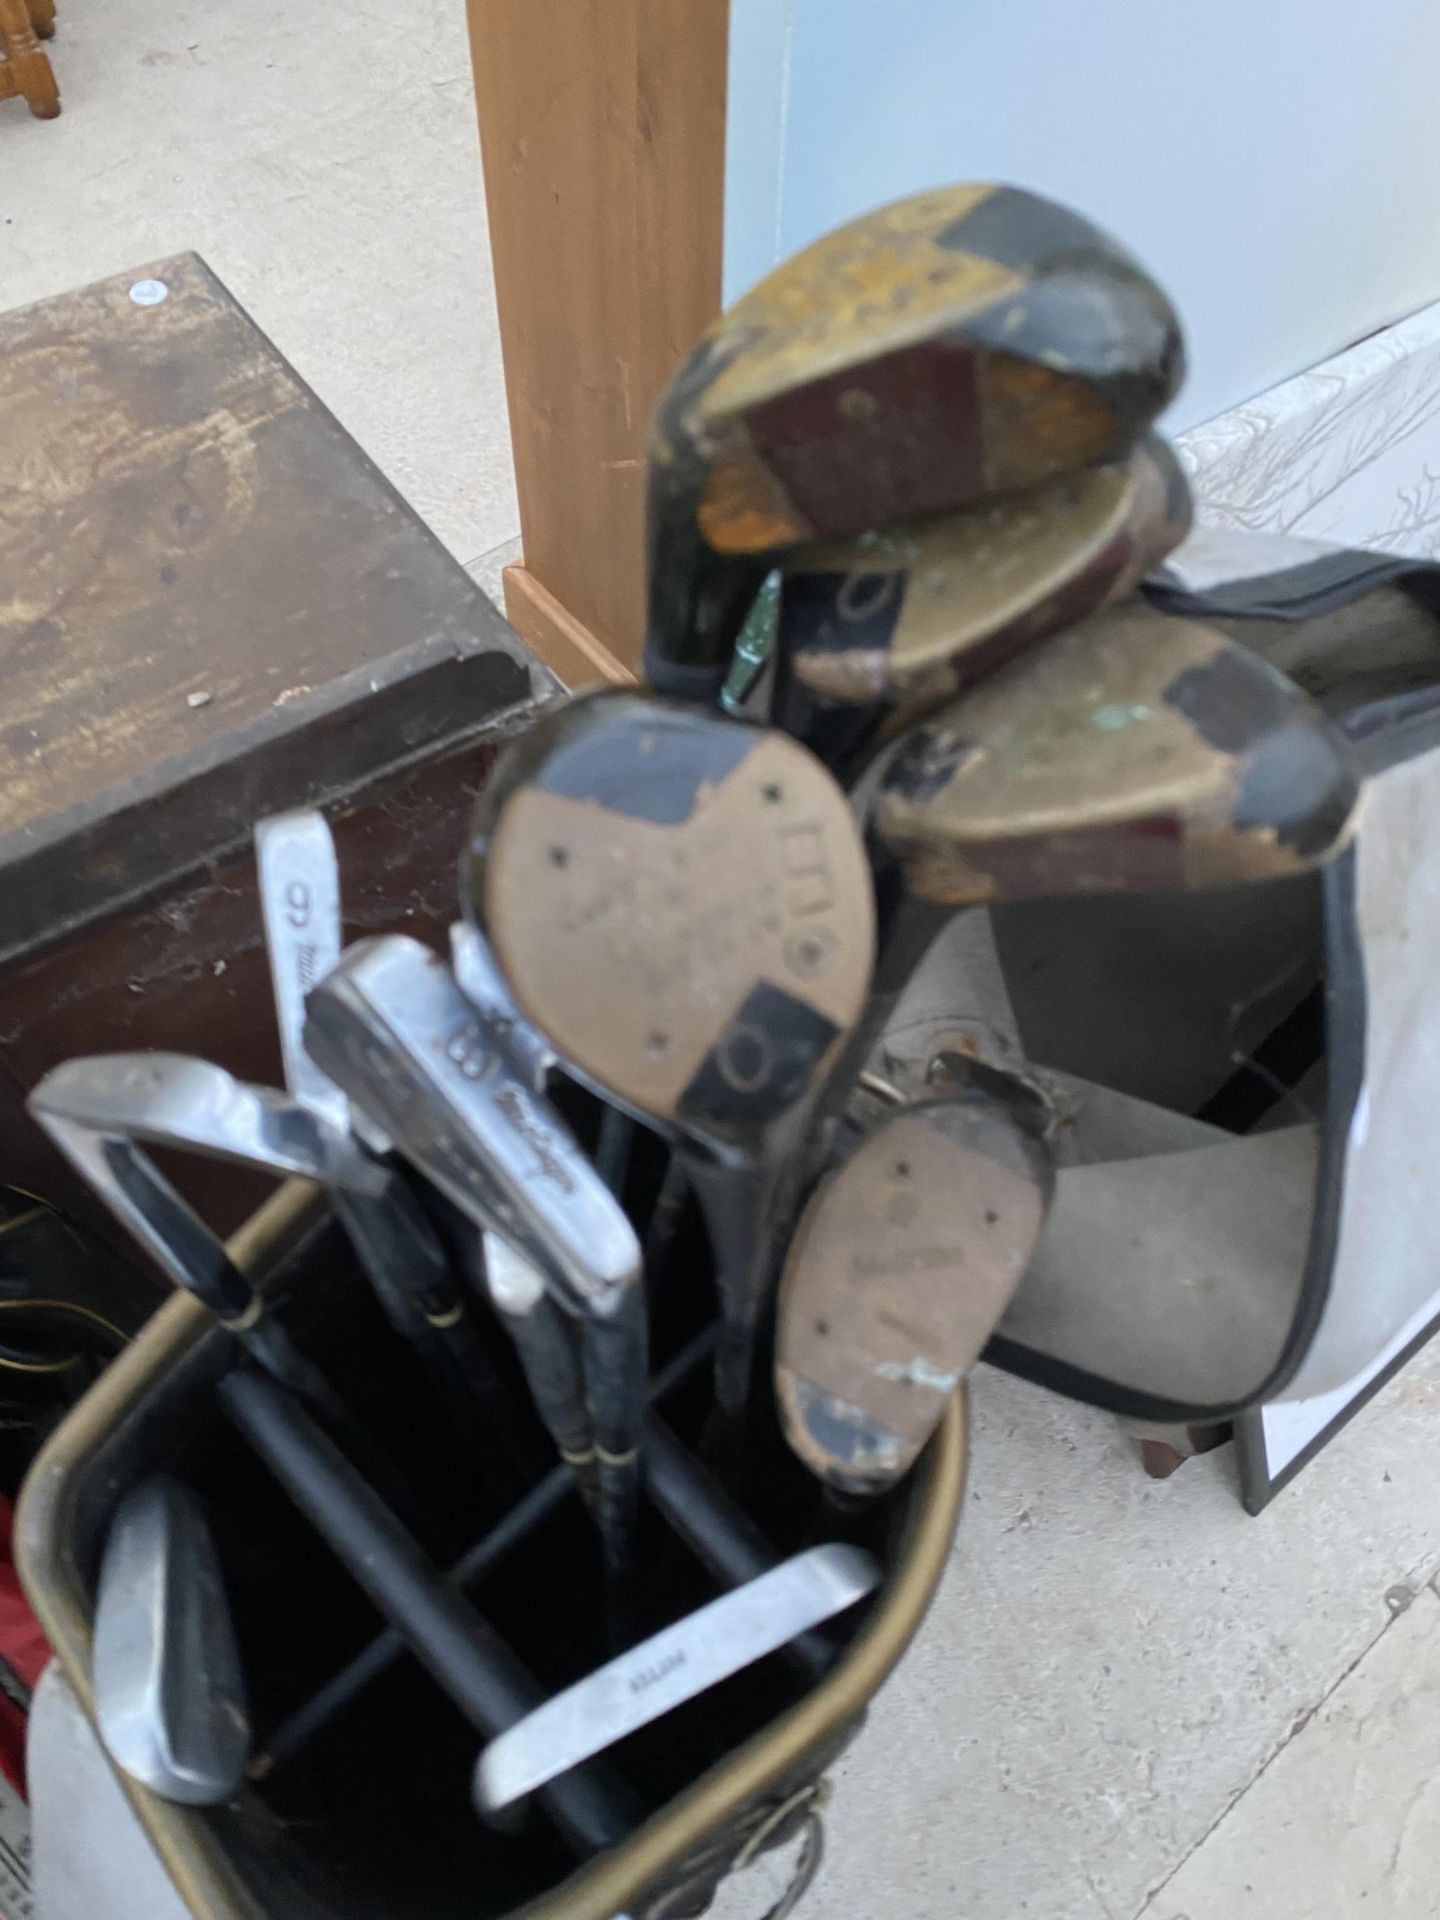 TWO VINTAGE GOLF BAGS AND AN ASSORTMENT OF VINTAGE GOLF CLUBS - Image 3 of 5